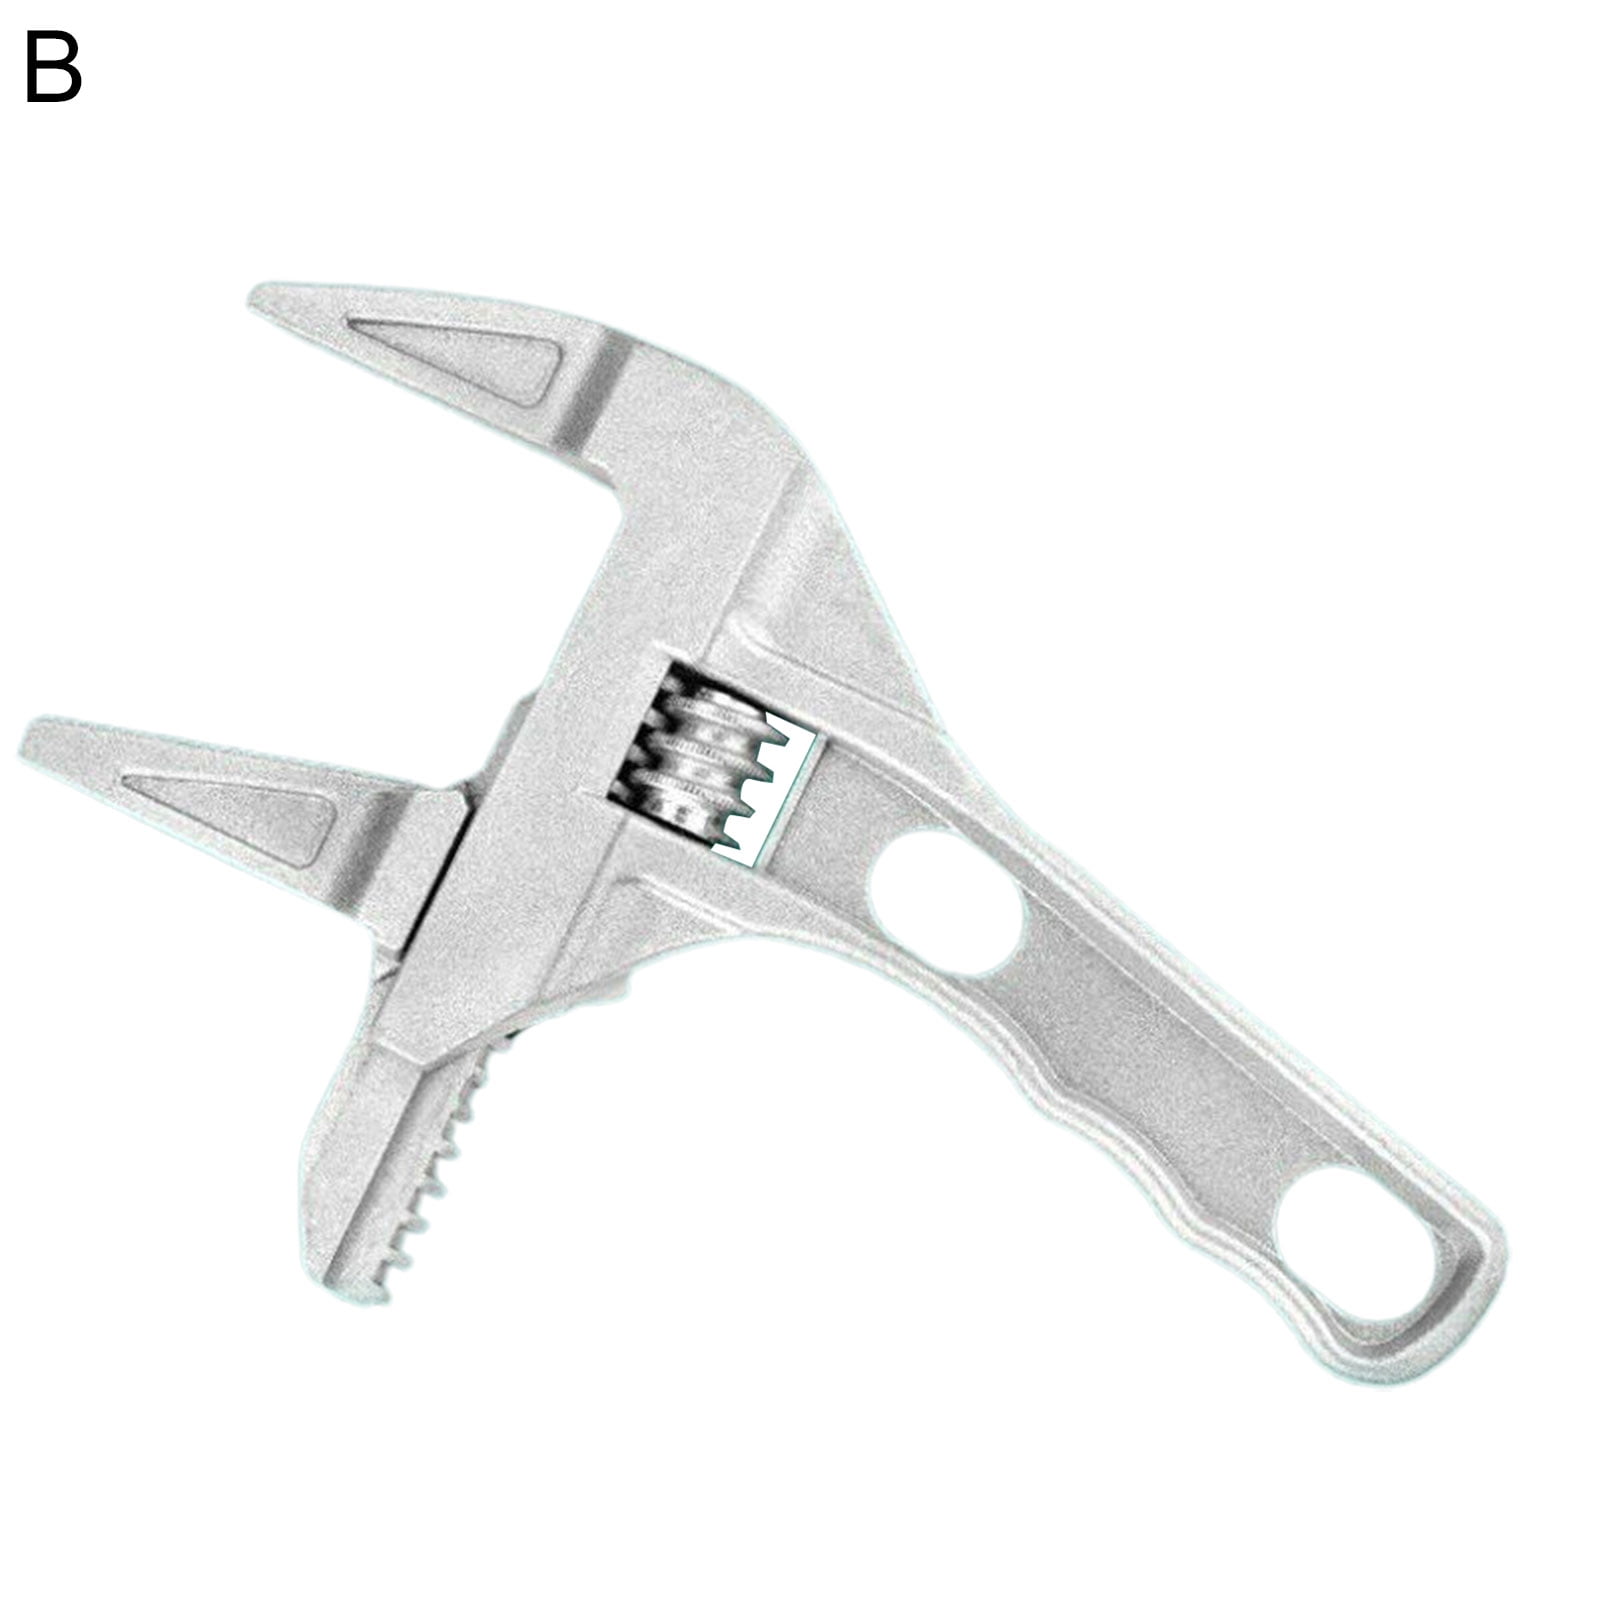 1x Mini Adjustable Spanner Wrenches Alloy Steel Hand Tool Pocket Size Spanners 